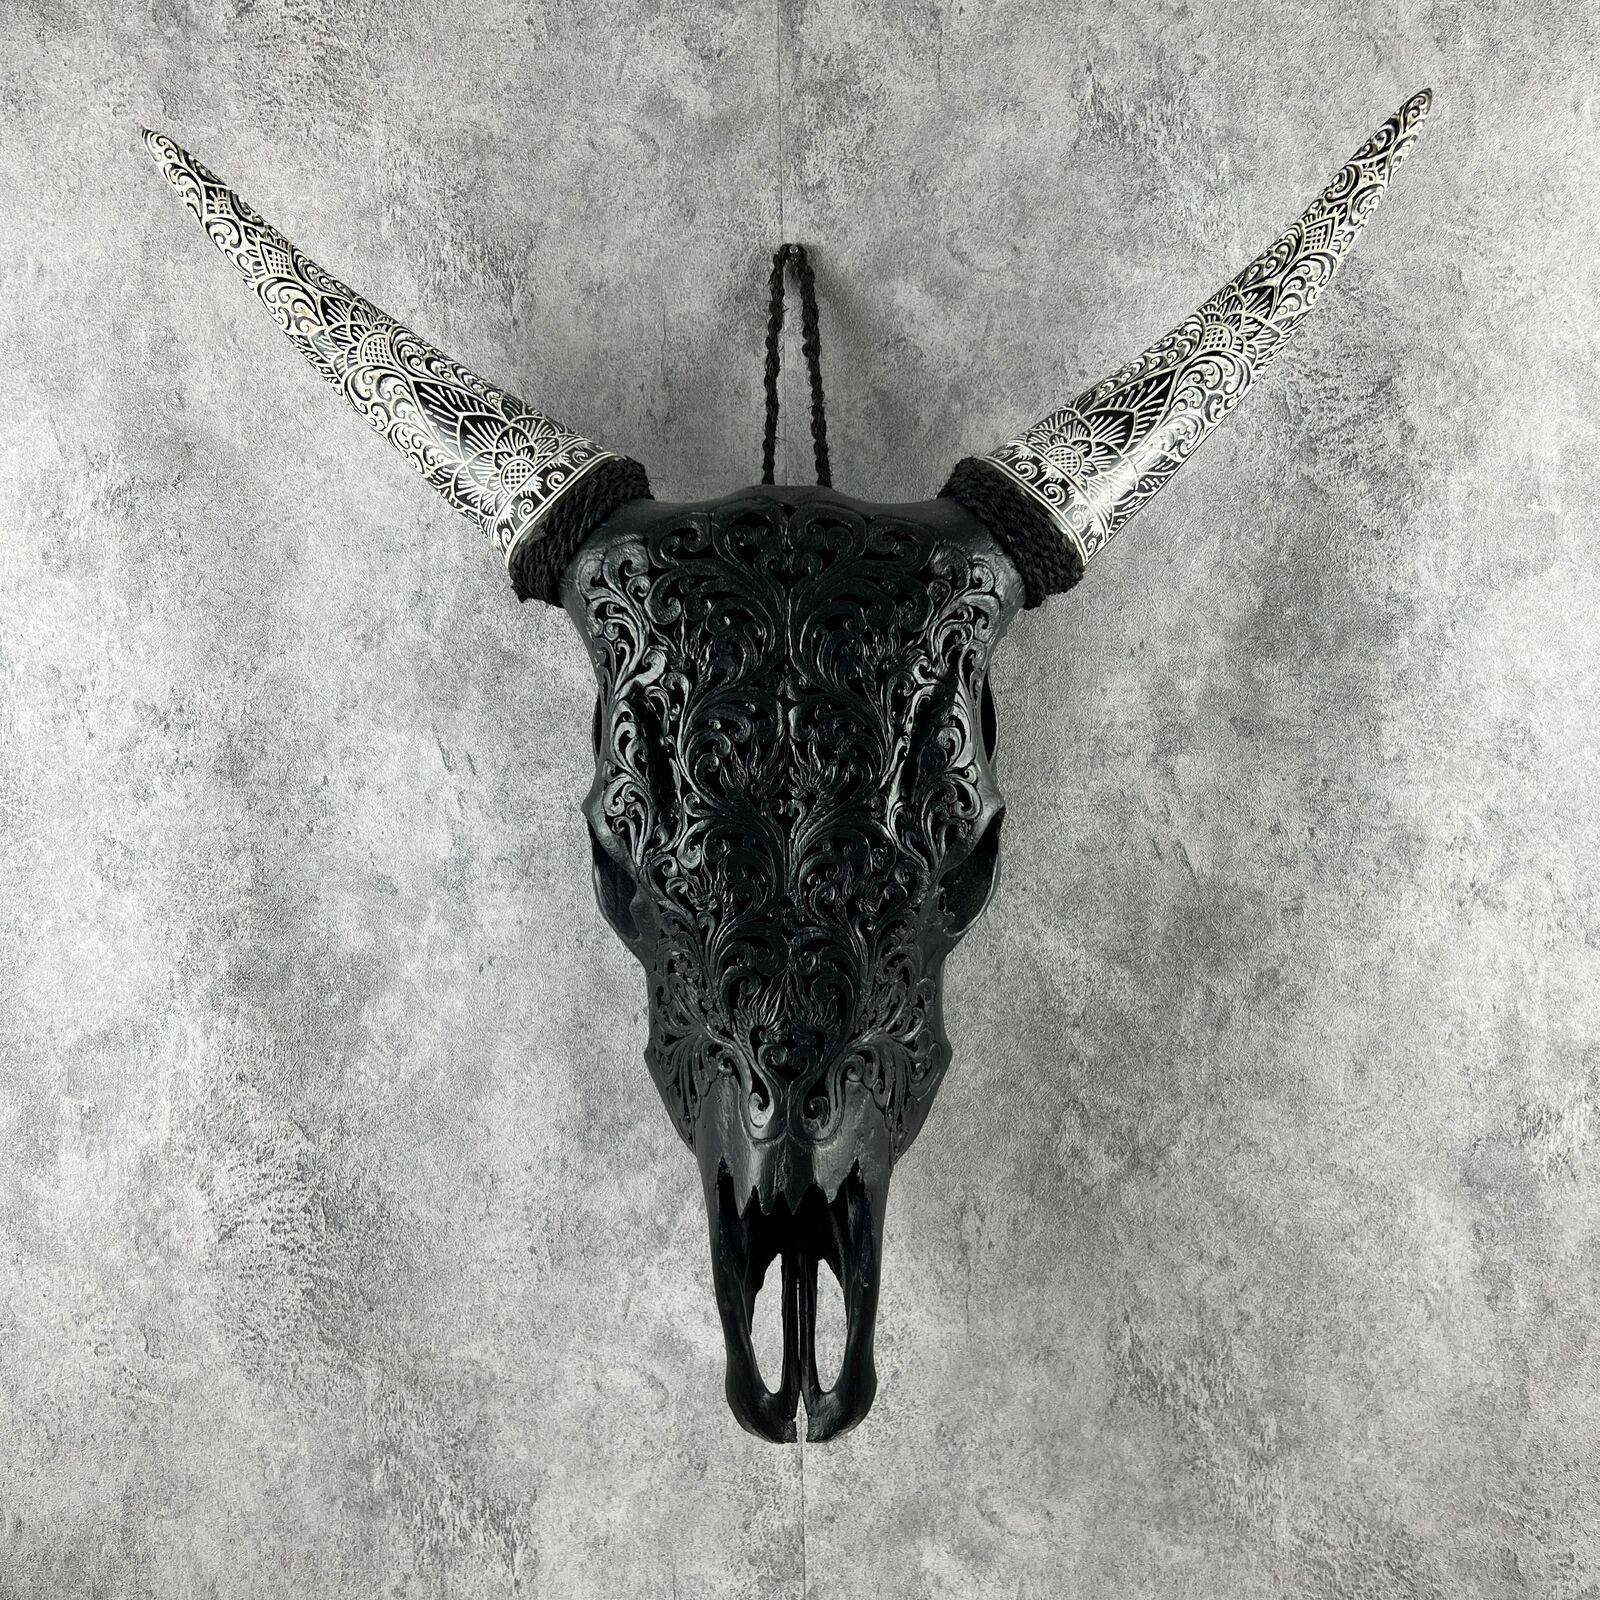 Hand-Carved Black Bull Skull with Intricate Patterns